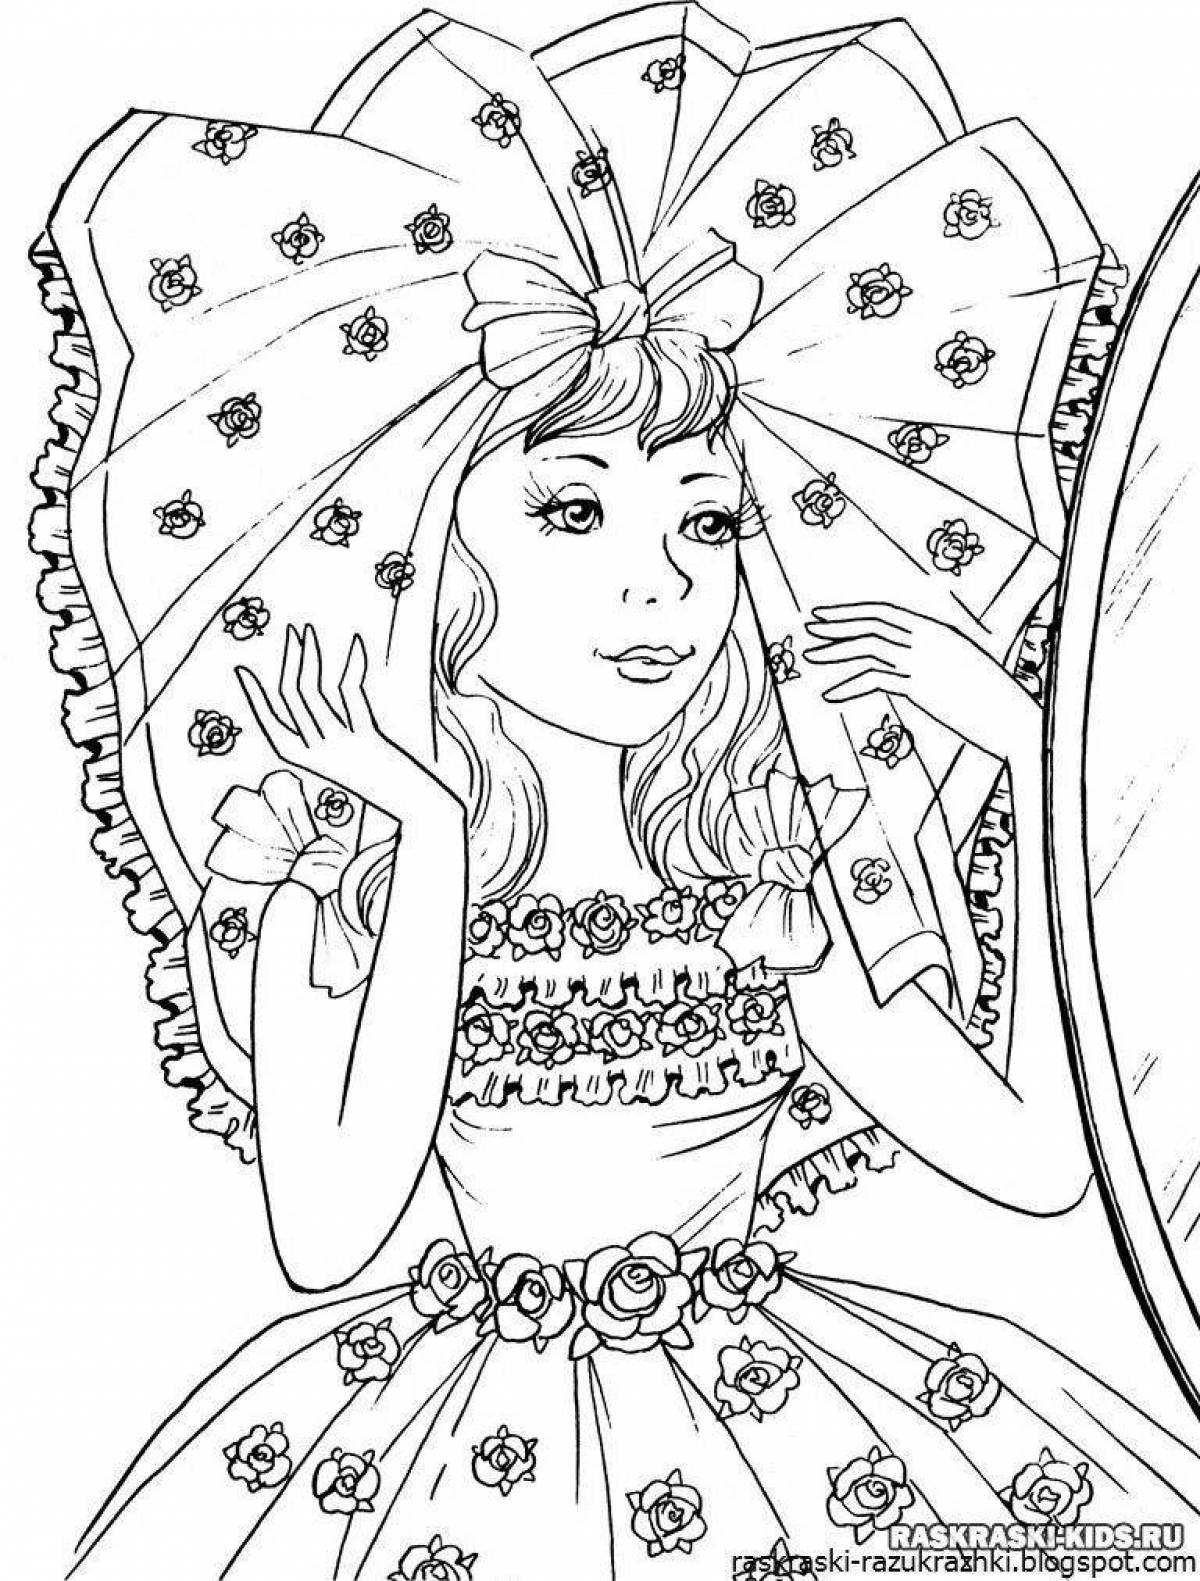 Fun coloring book for girls 8-10 years old